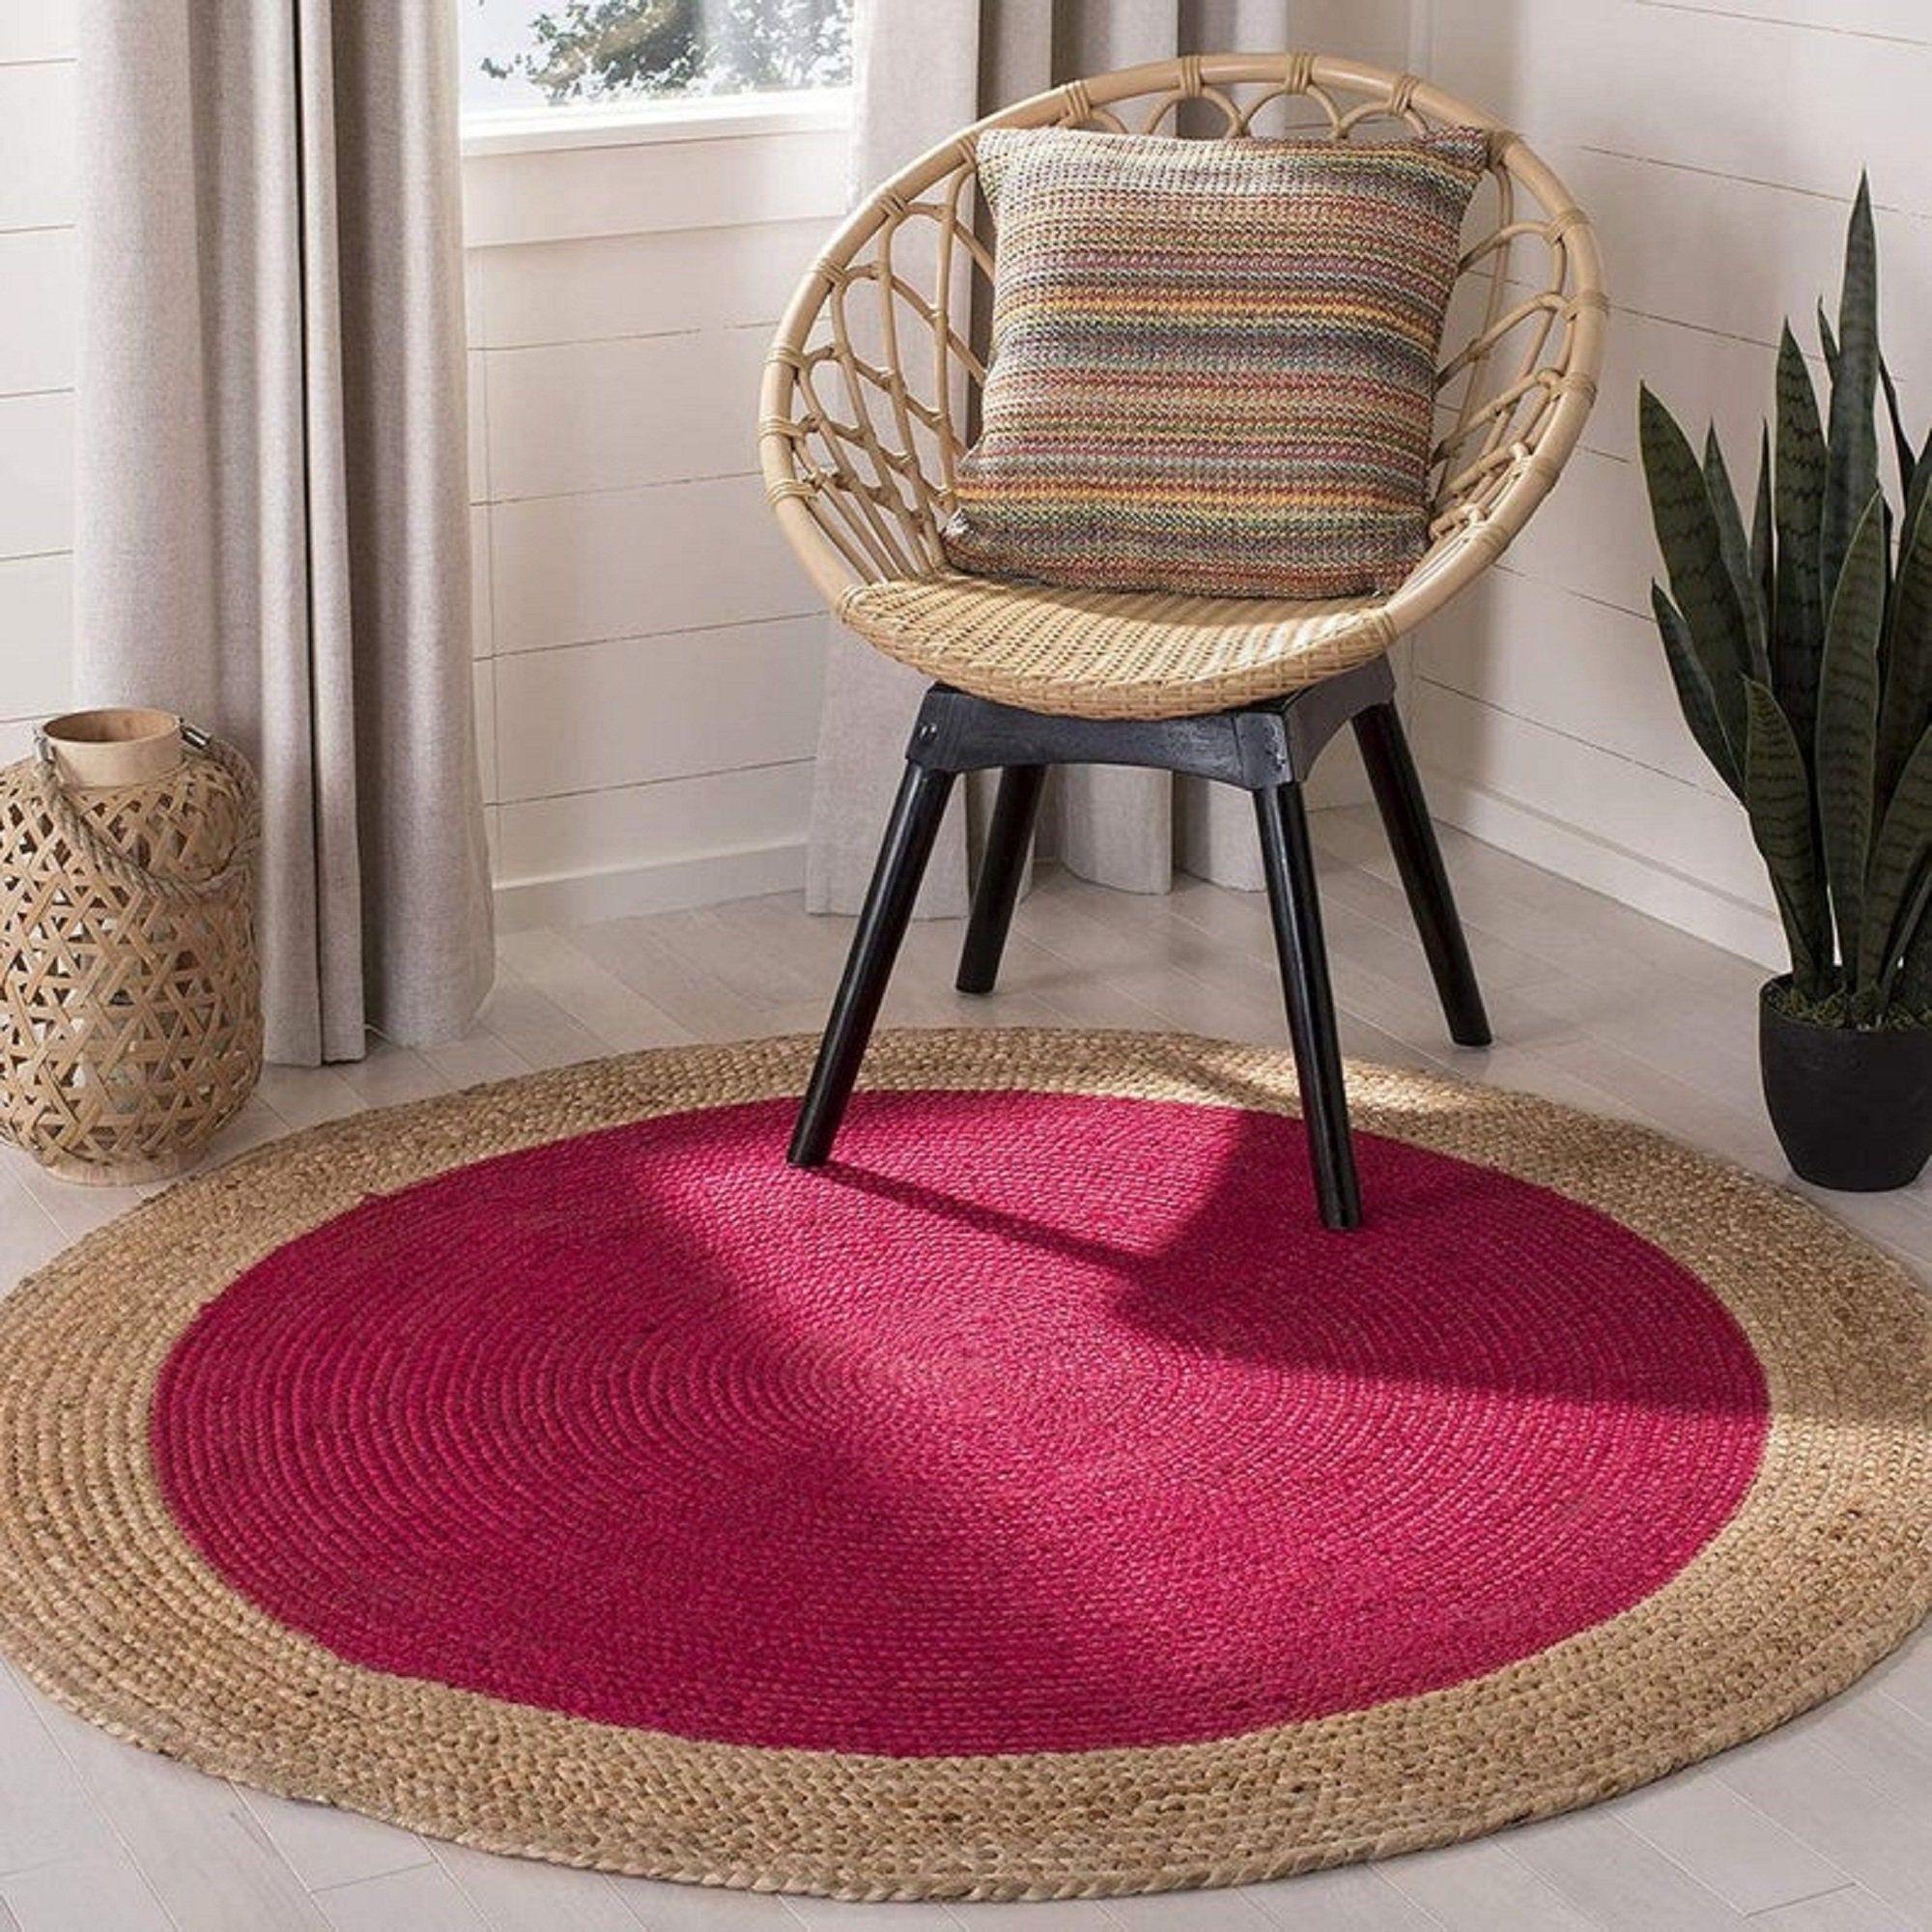 Cotton Jute Round Rugs With Border Indian Handmade & Purely – Etsy Intended For Border Round Rugs (Photo 11 of 15)